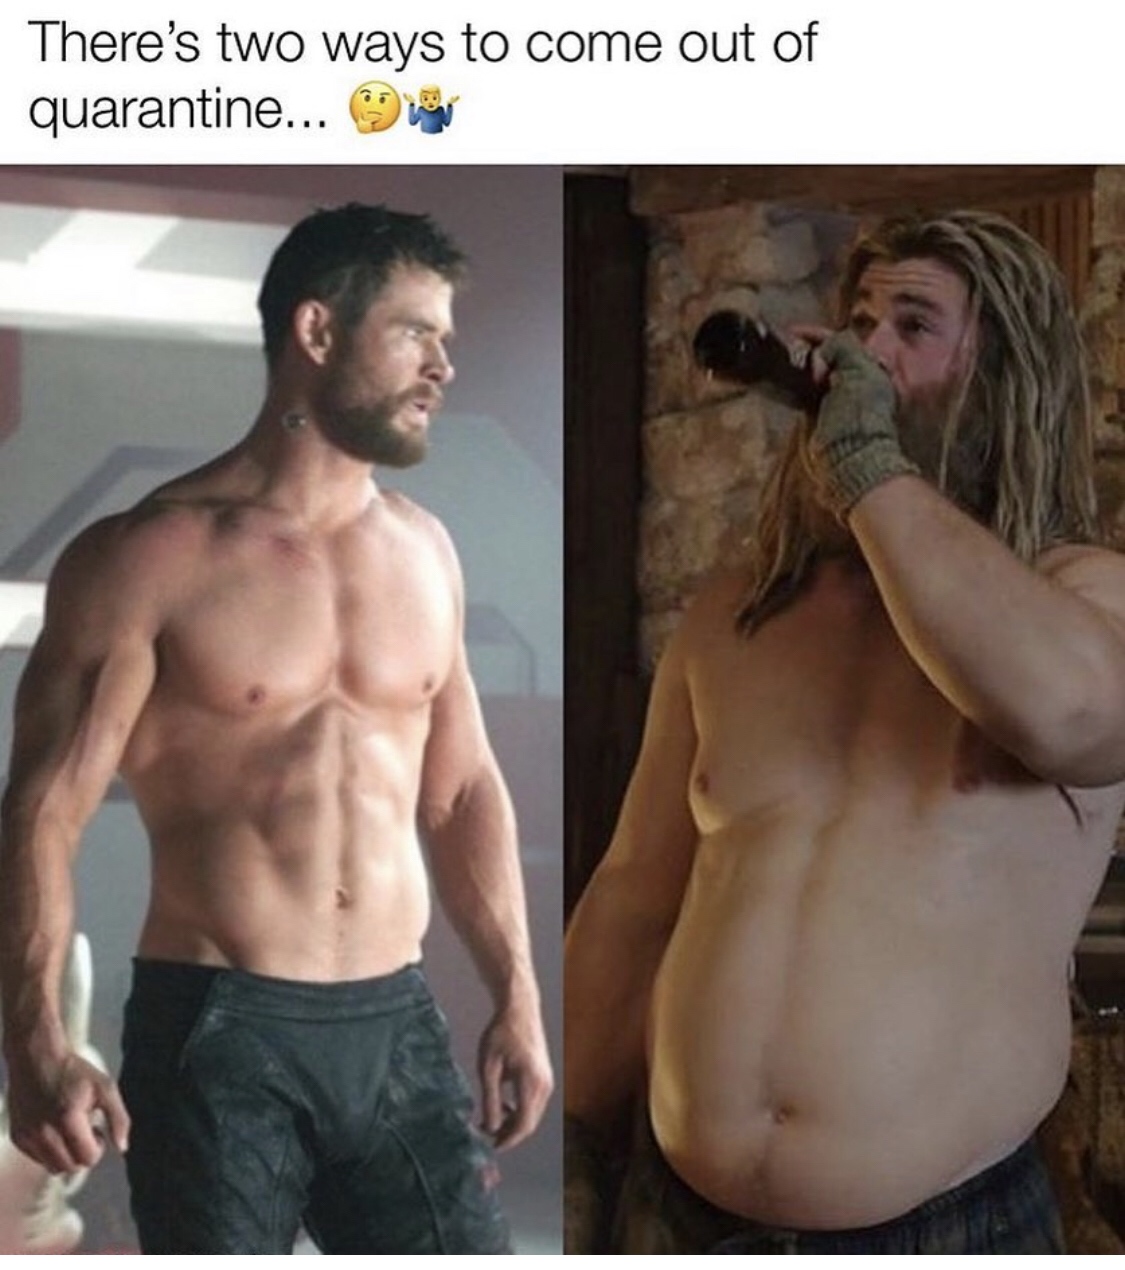 thor body - There's two ways to come out of quarantine... 9